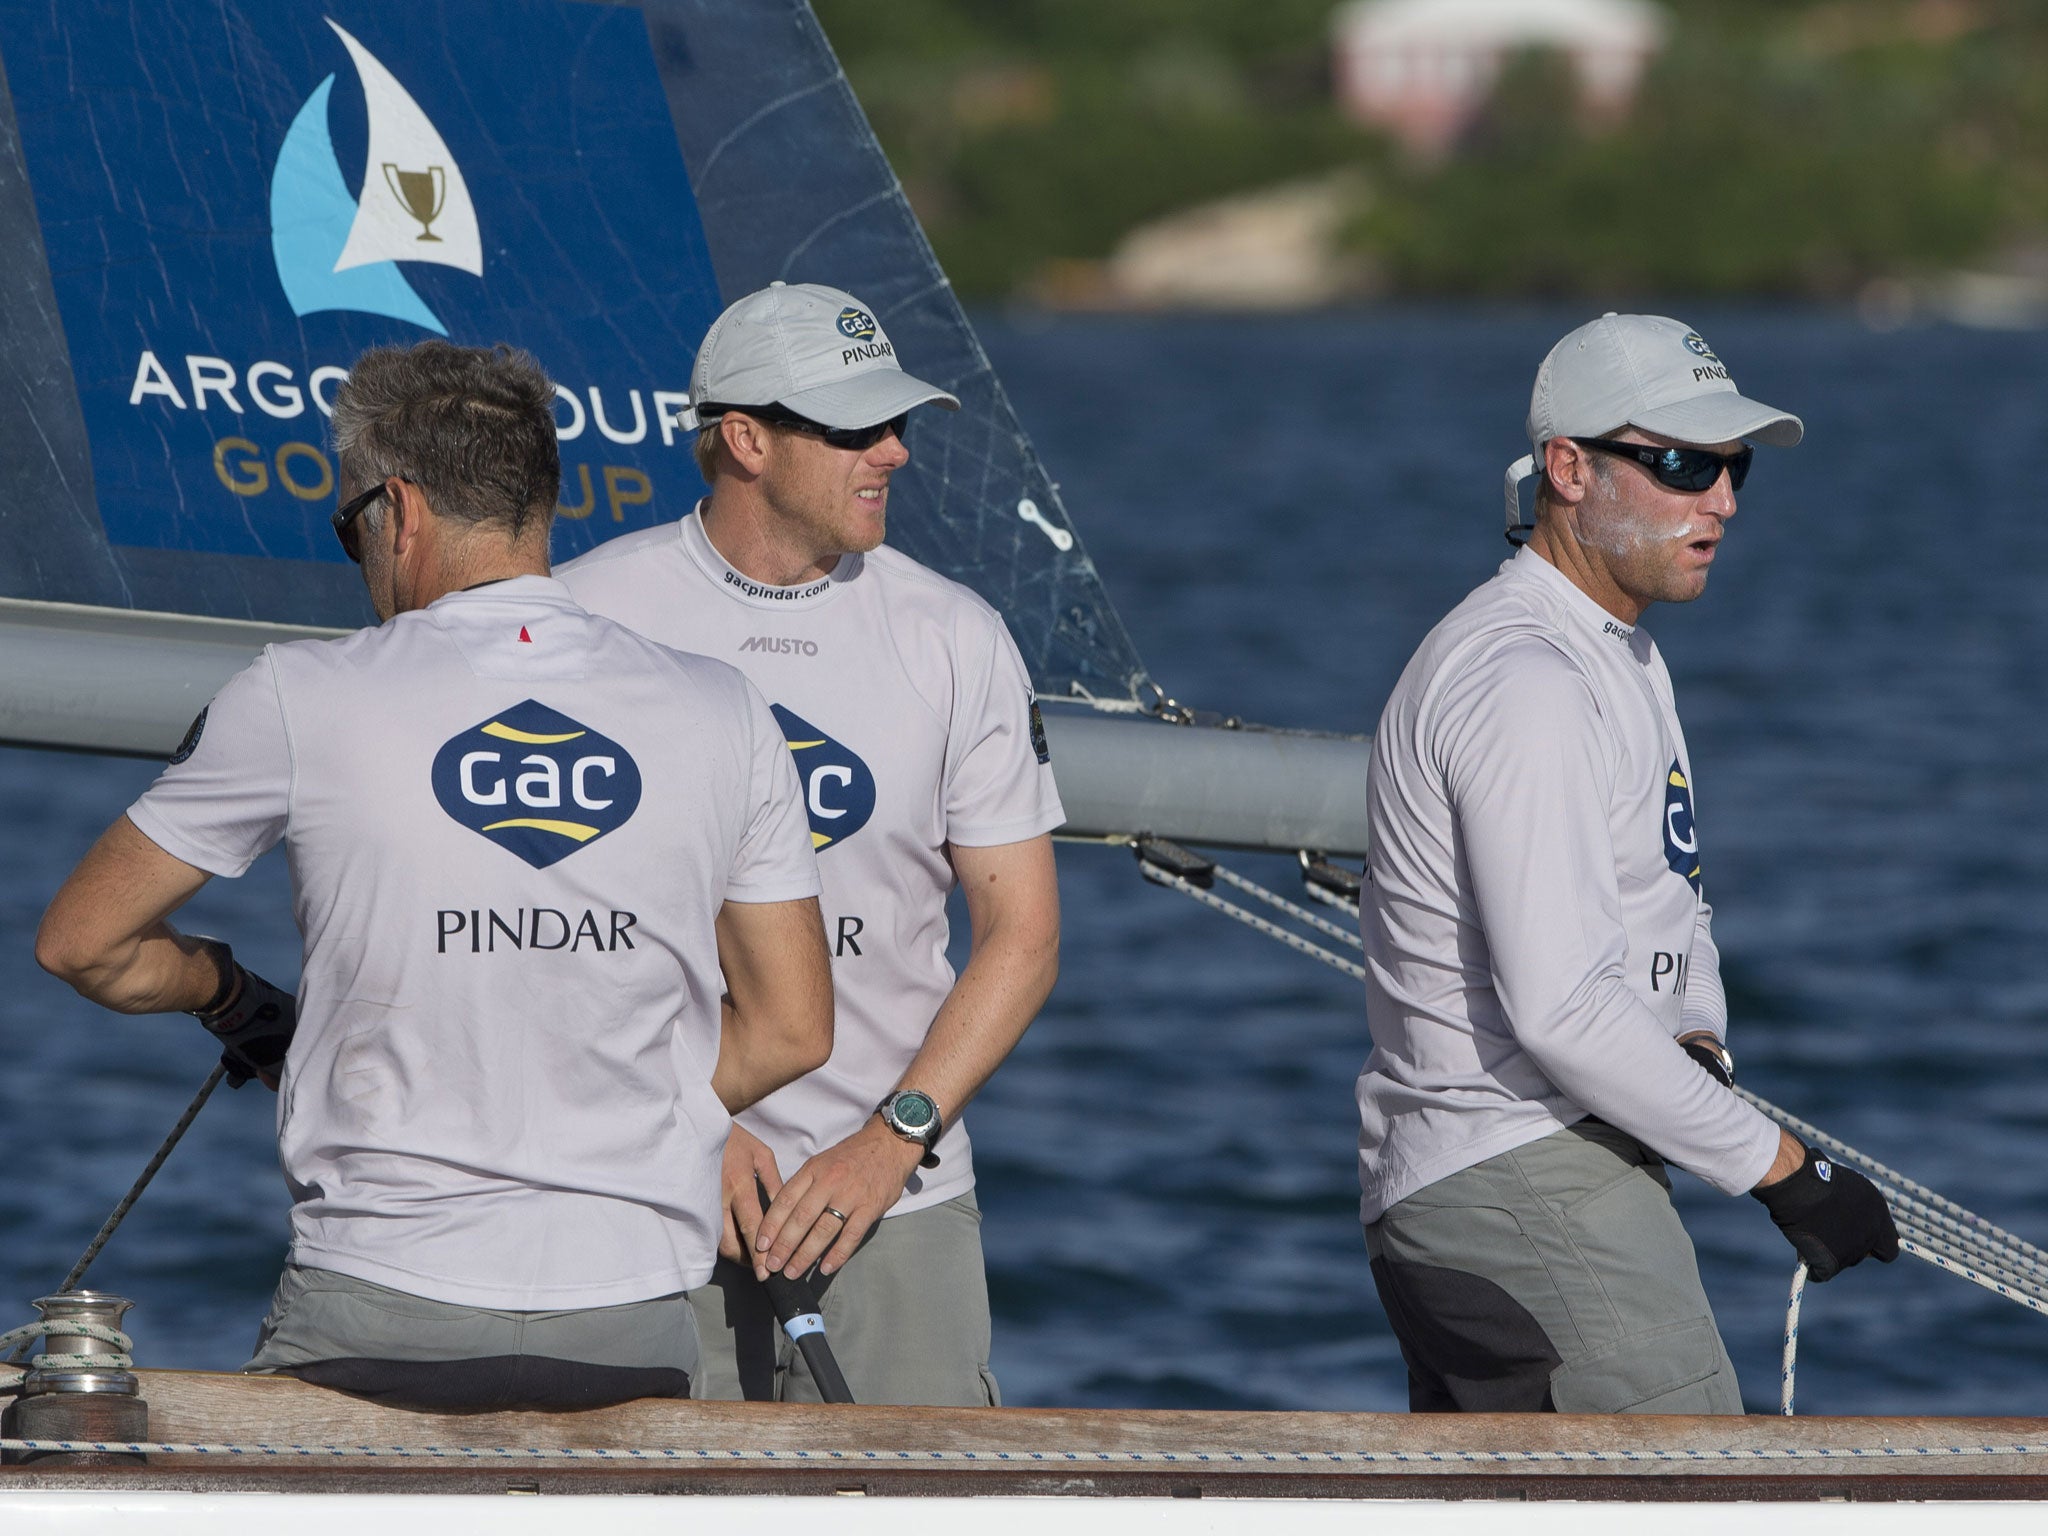 Spitting tacks, defending world match racing champion Ian Williams picked his own quarter final executioner when being knocked out of the Argo Group Gold Cup in Bermuda by his closest rival in the Alpari World Match Racing Tour, Taylor Canfield of the US 